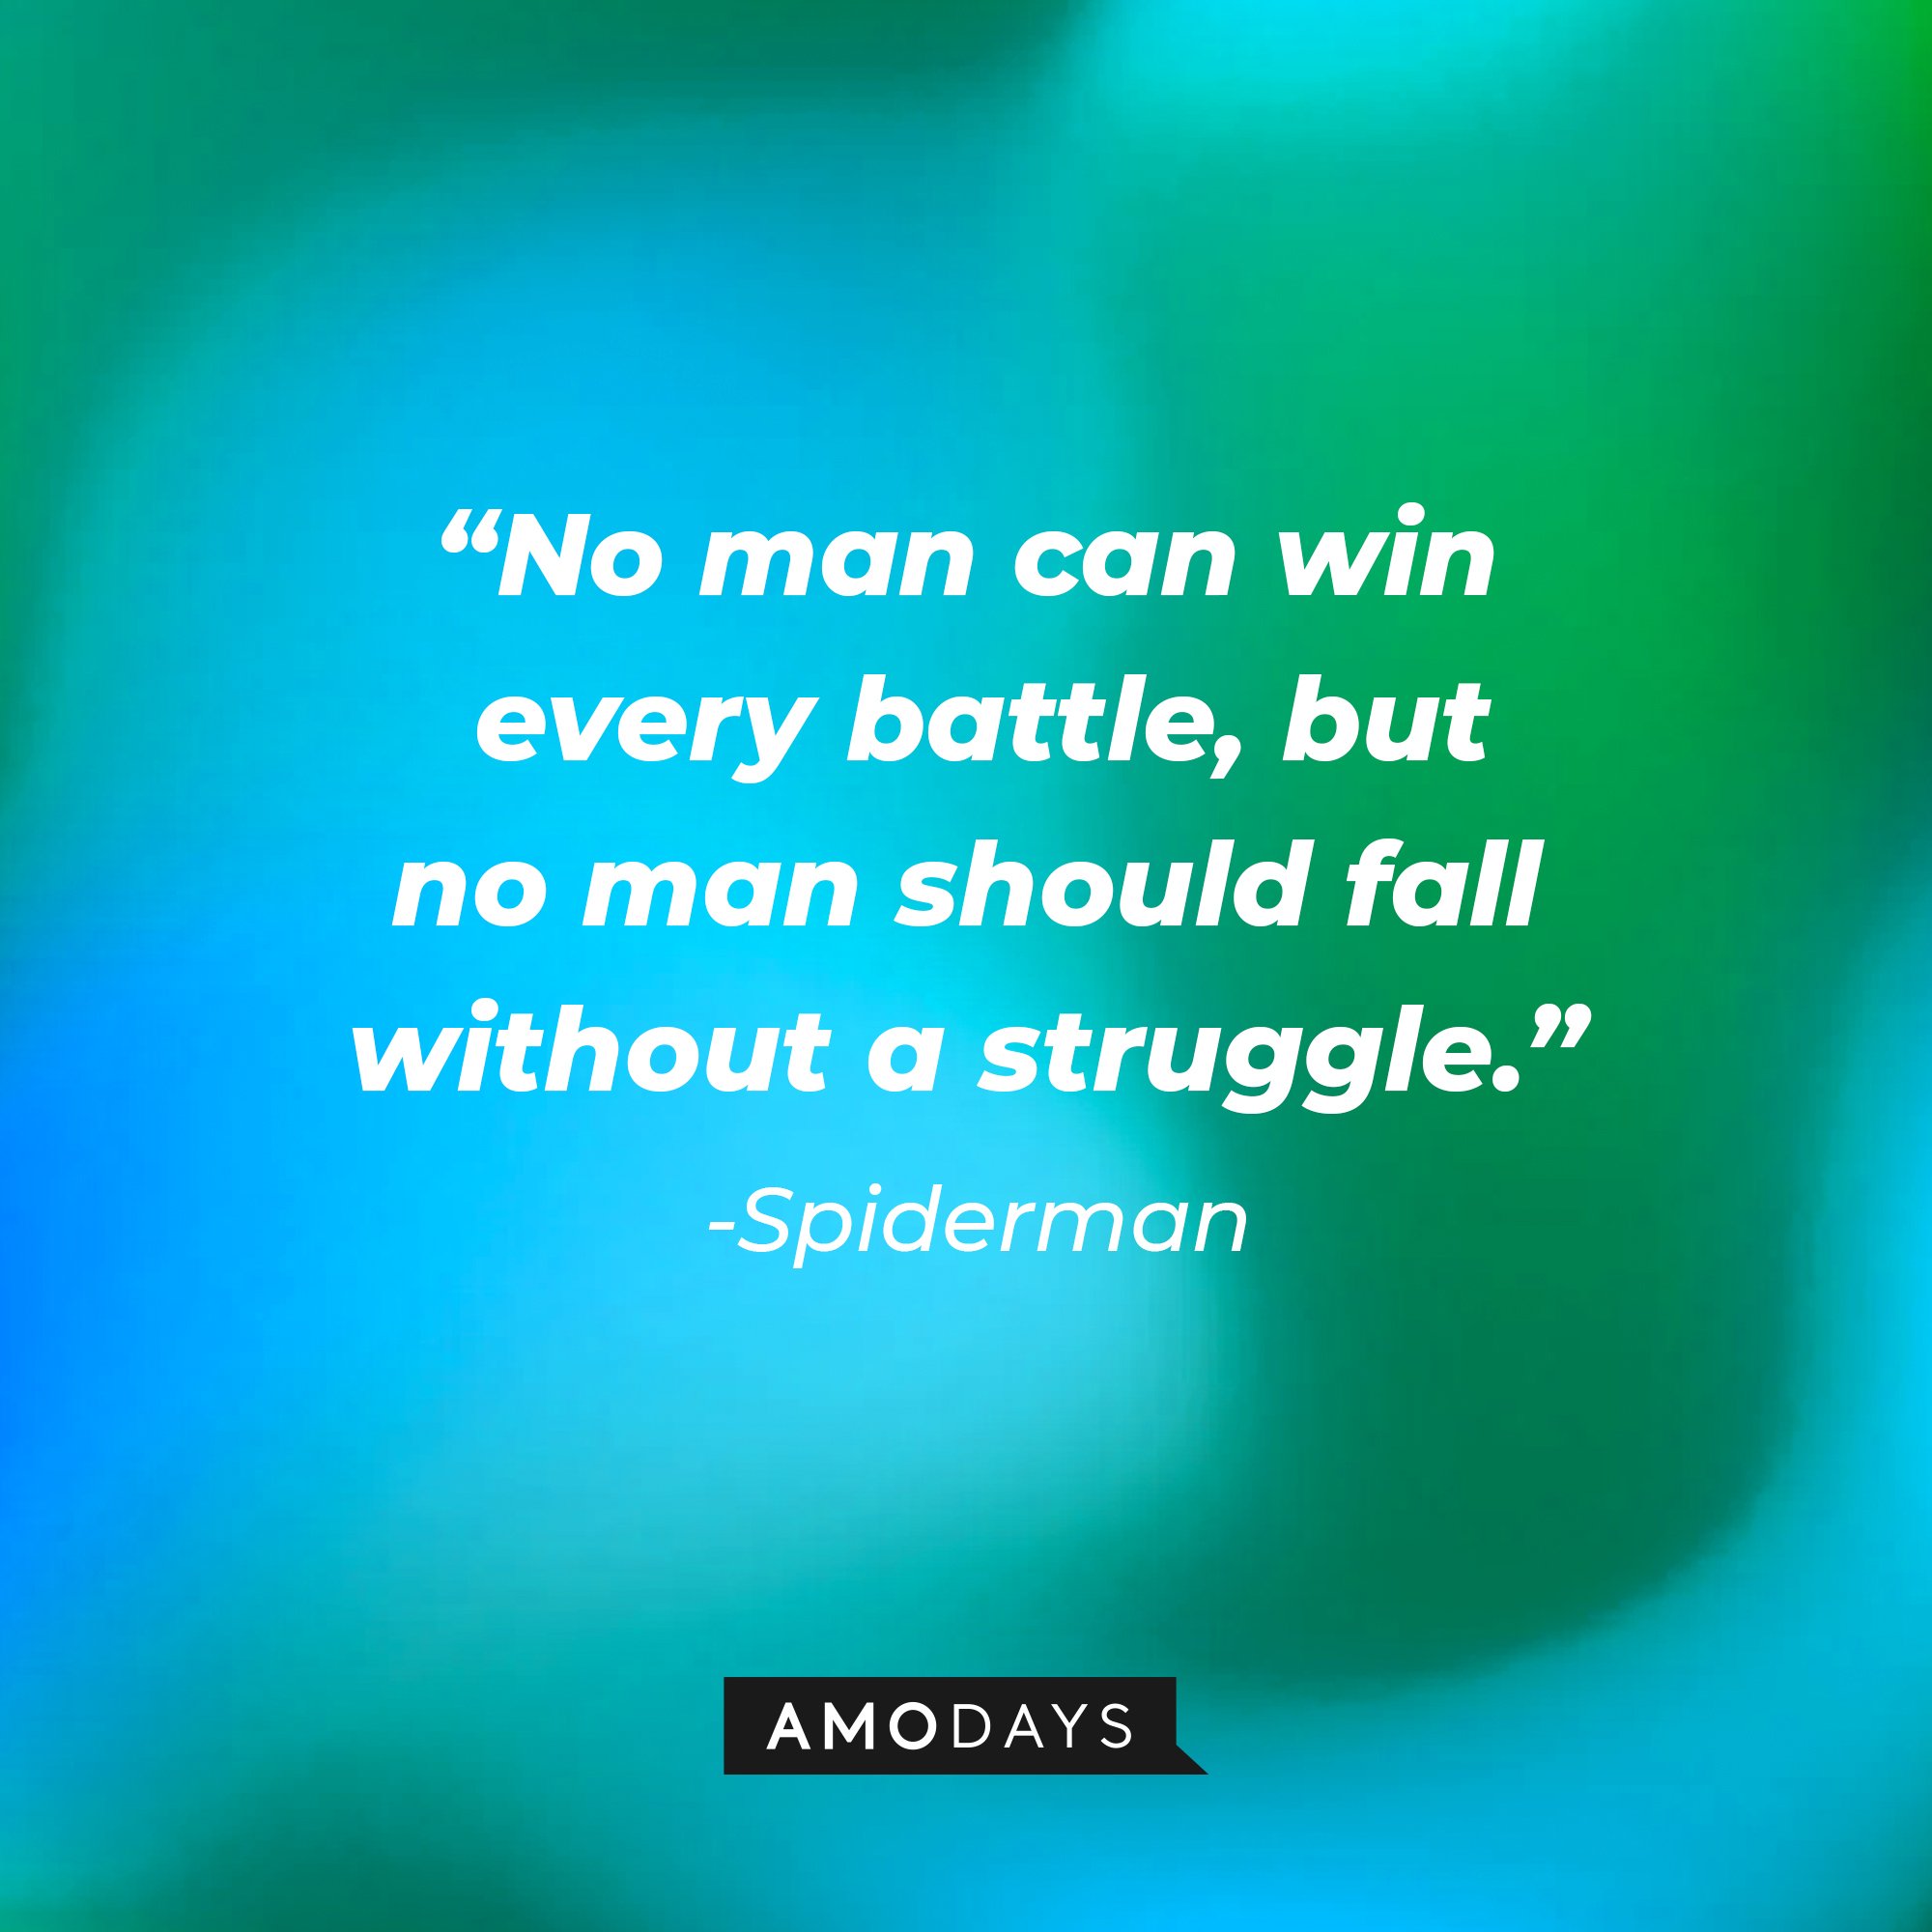 Spiderman 's quote: “No man can win every battle, but no man should fall without a struggle.” | Image: AmoDays